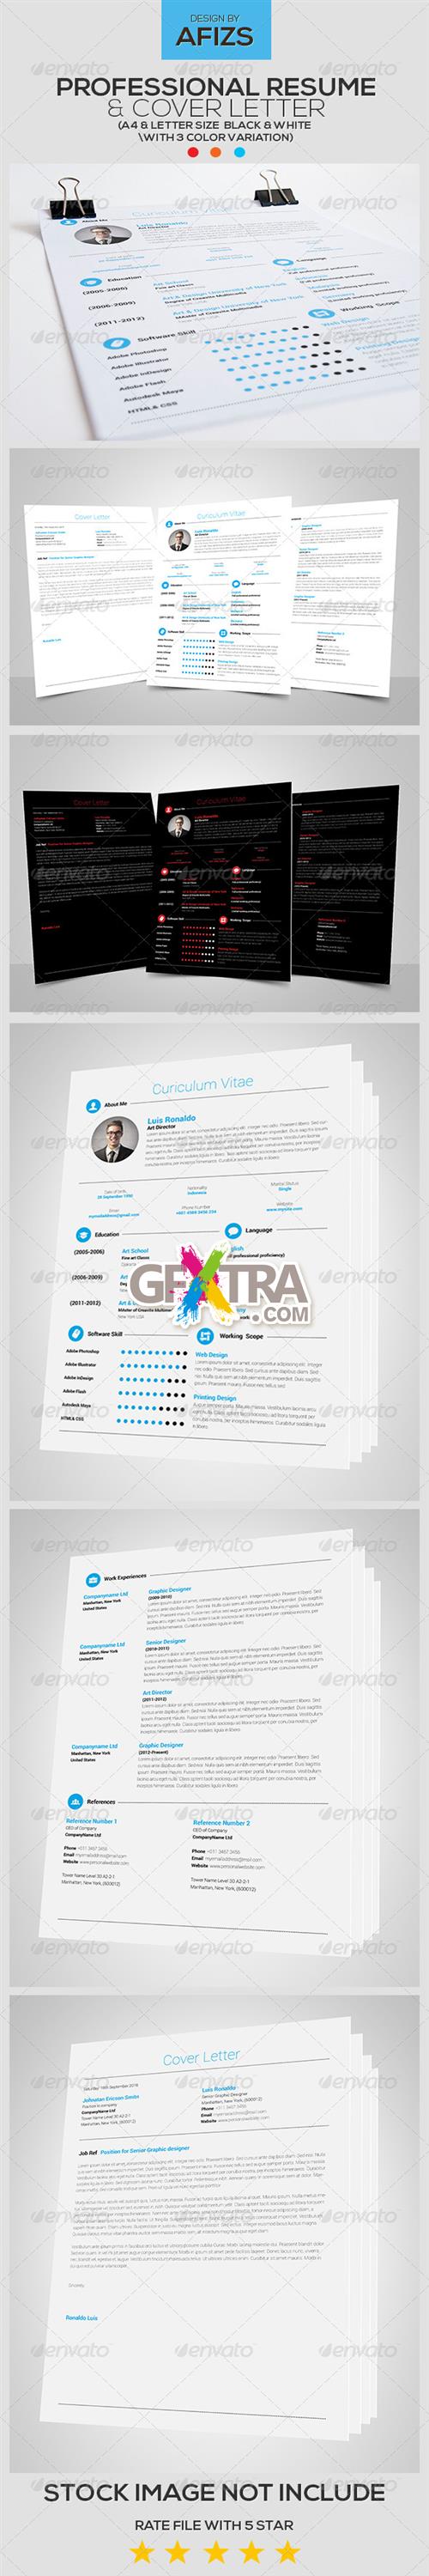 GraphicRiver - Professional Resume & Cover Letter